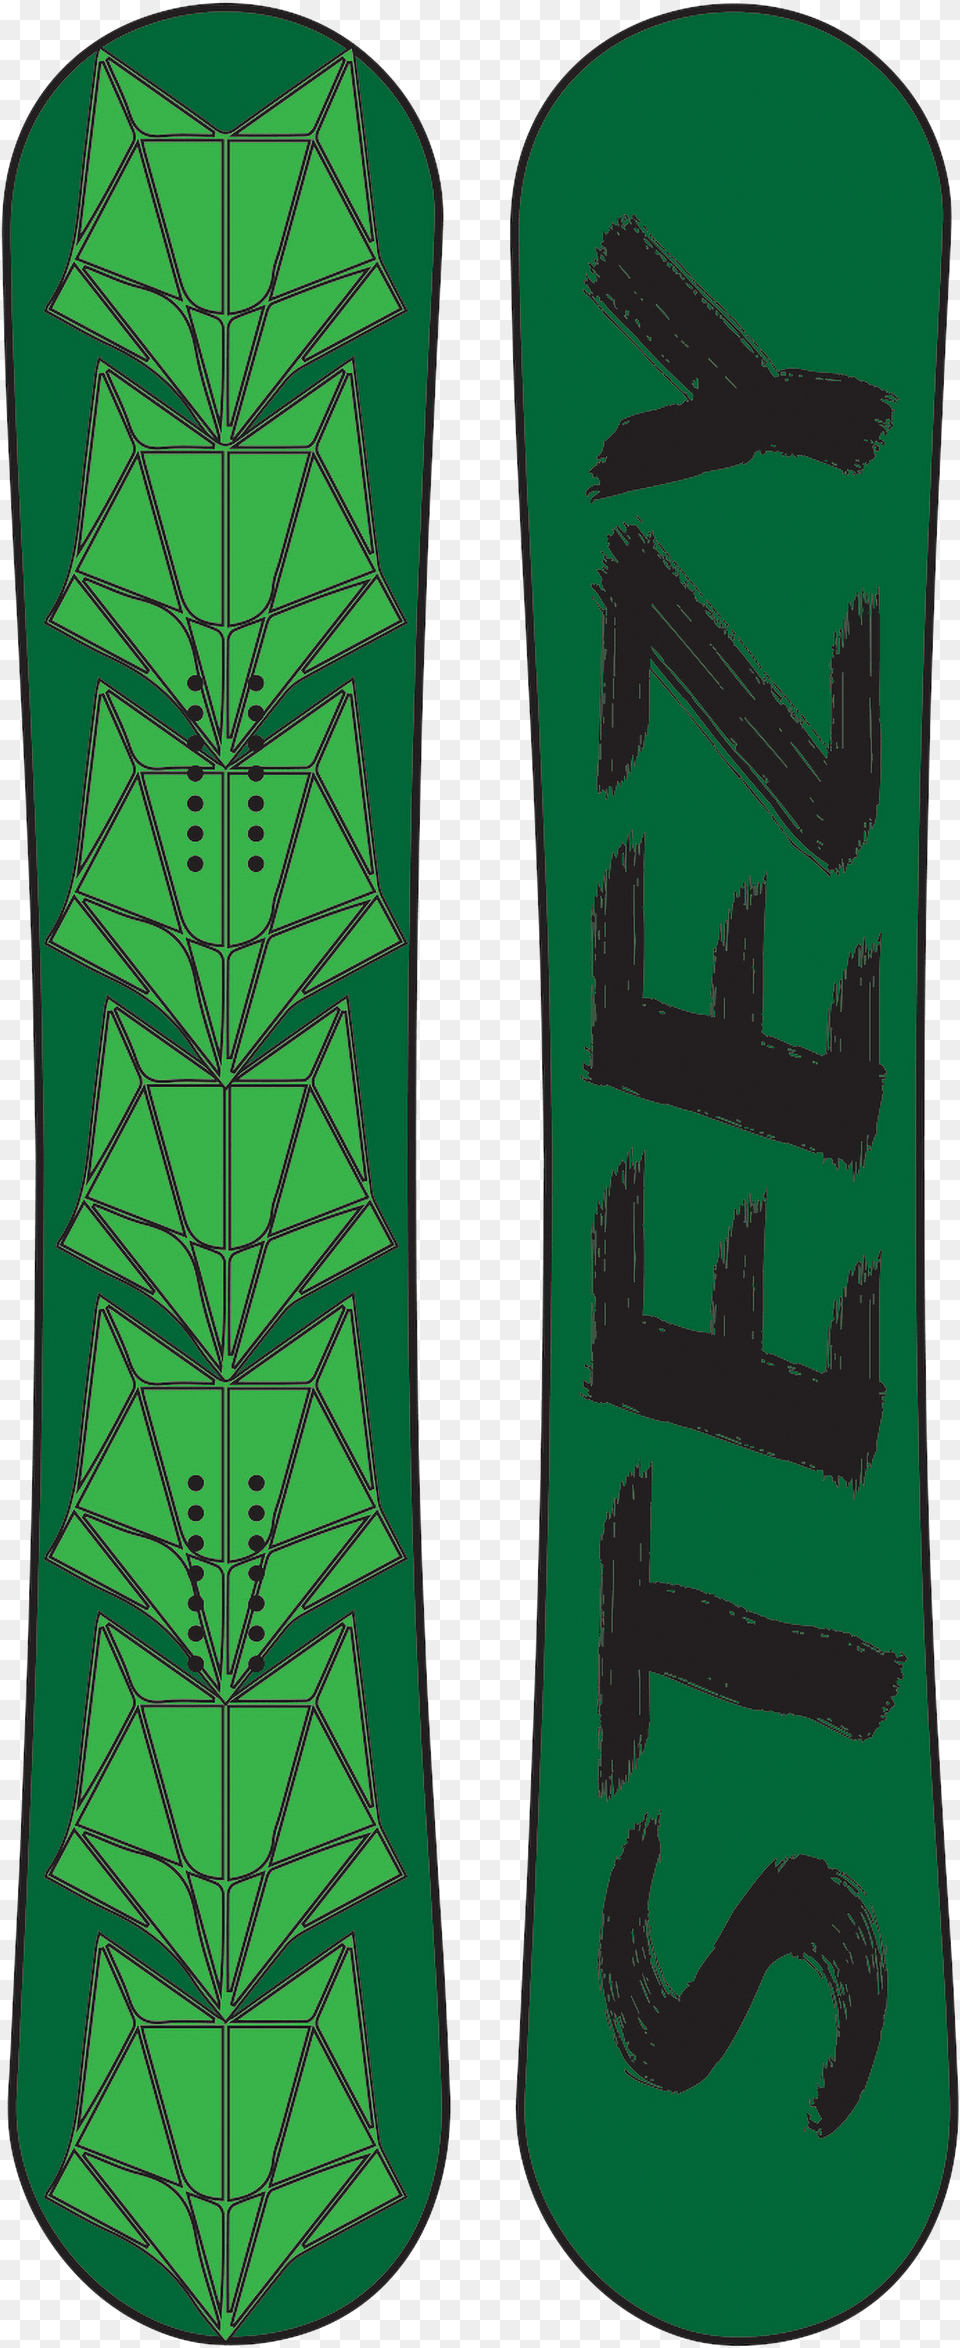 Steezy Green Lantern Snowboard Triangle Free Png Download